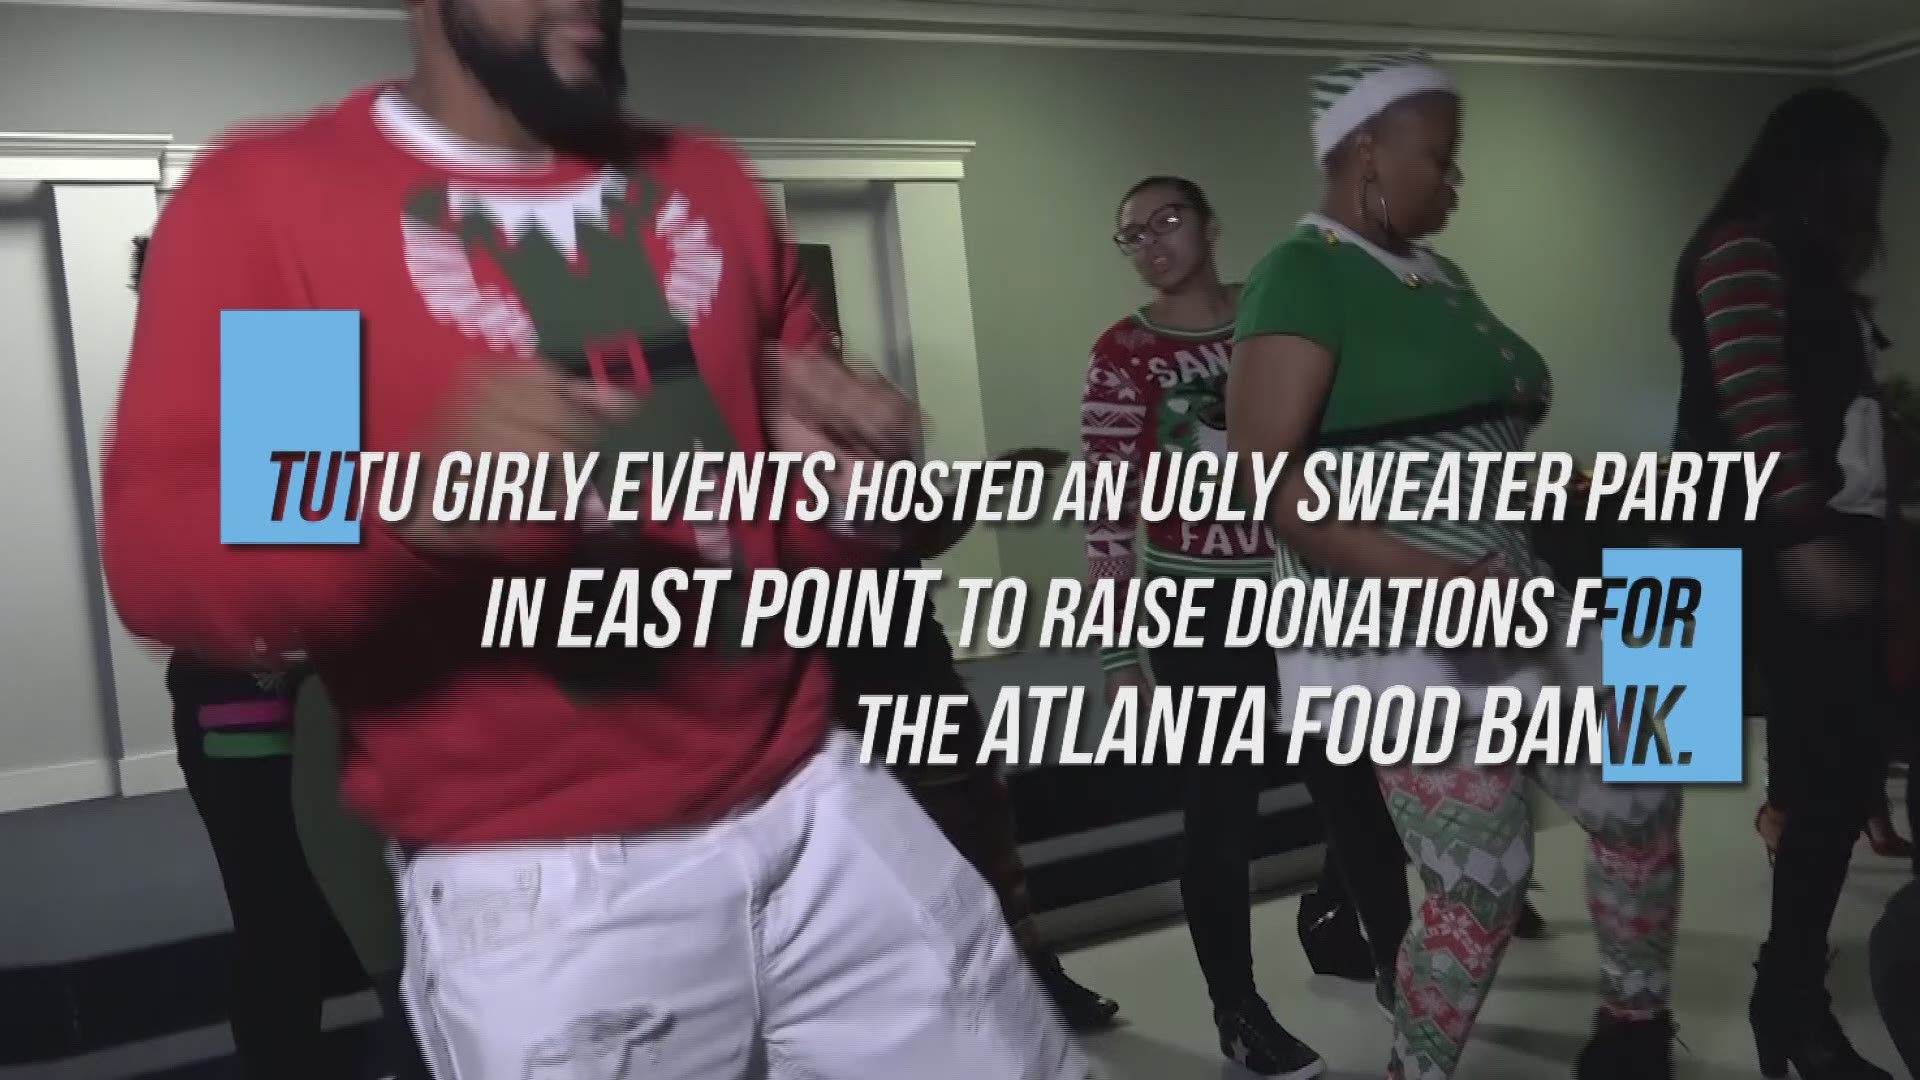 But the cause is so delightful. Tutu Girly Events hosted an Ugly Sweater Party in East Point to raise donations for the Atlanta Food Bank.